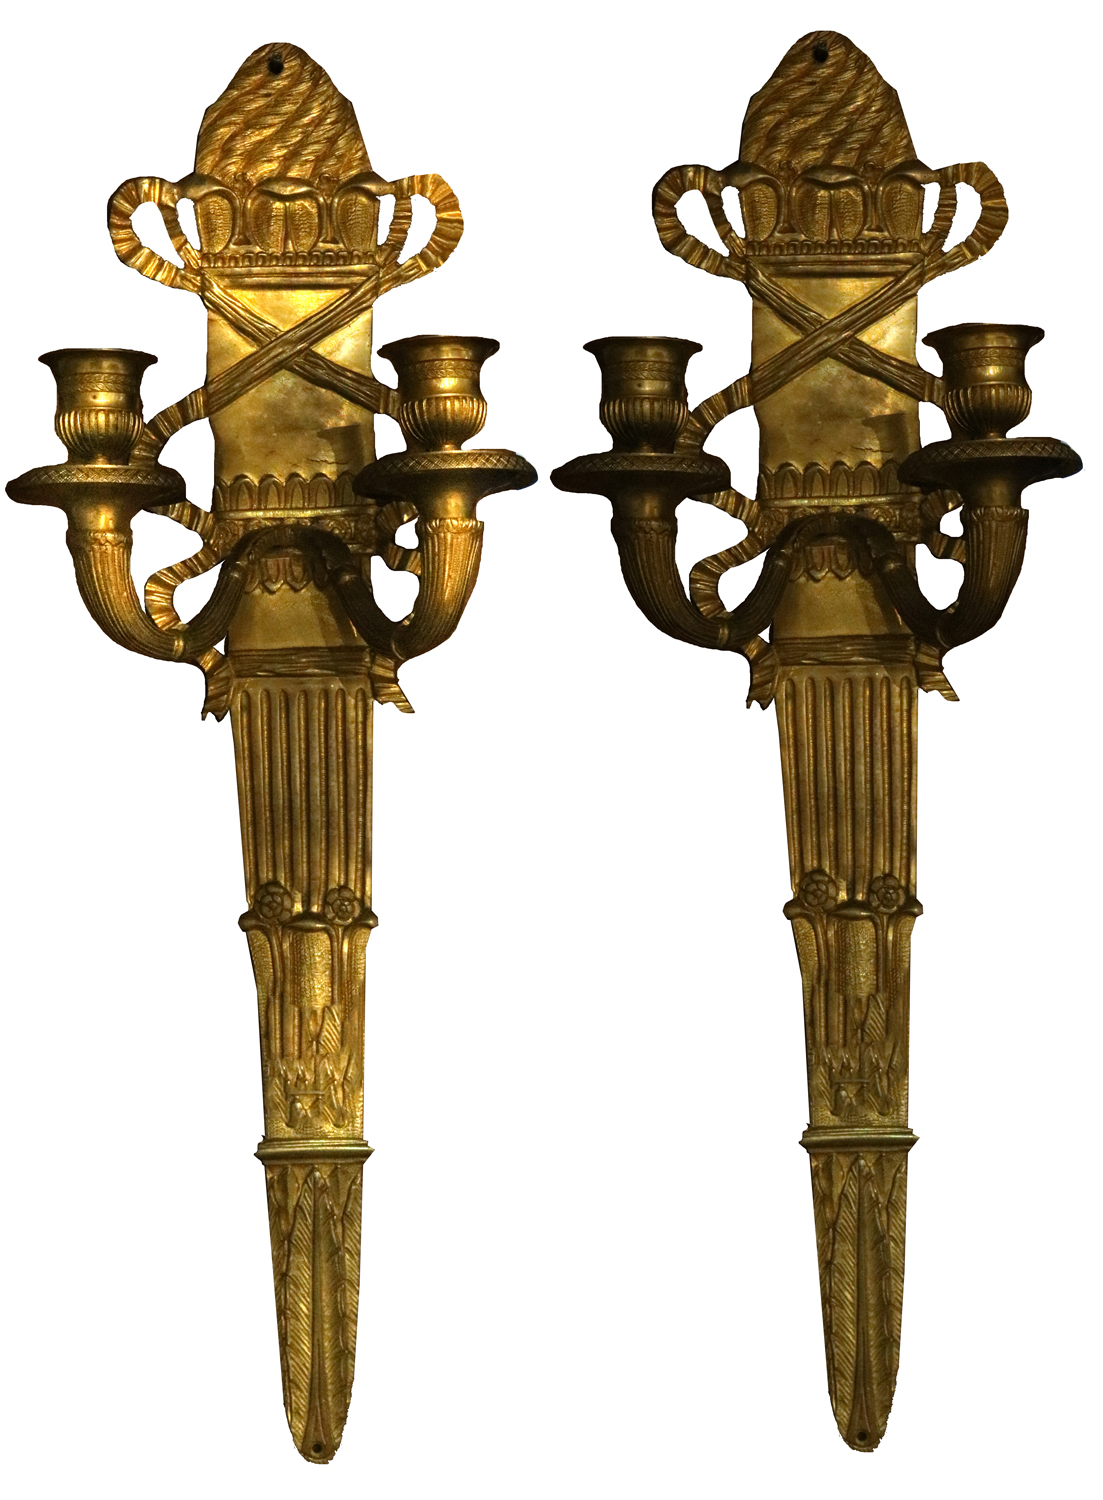 A PAIR OF NEOCLASSICAL STYLE SCONCES